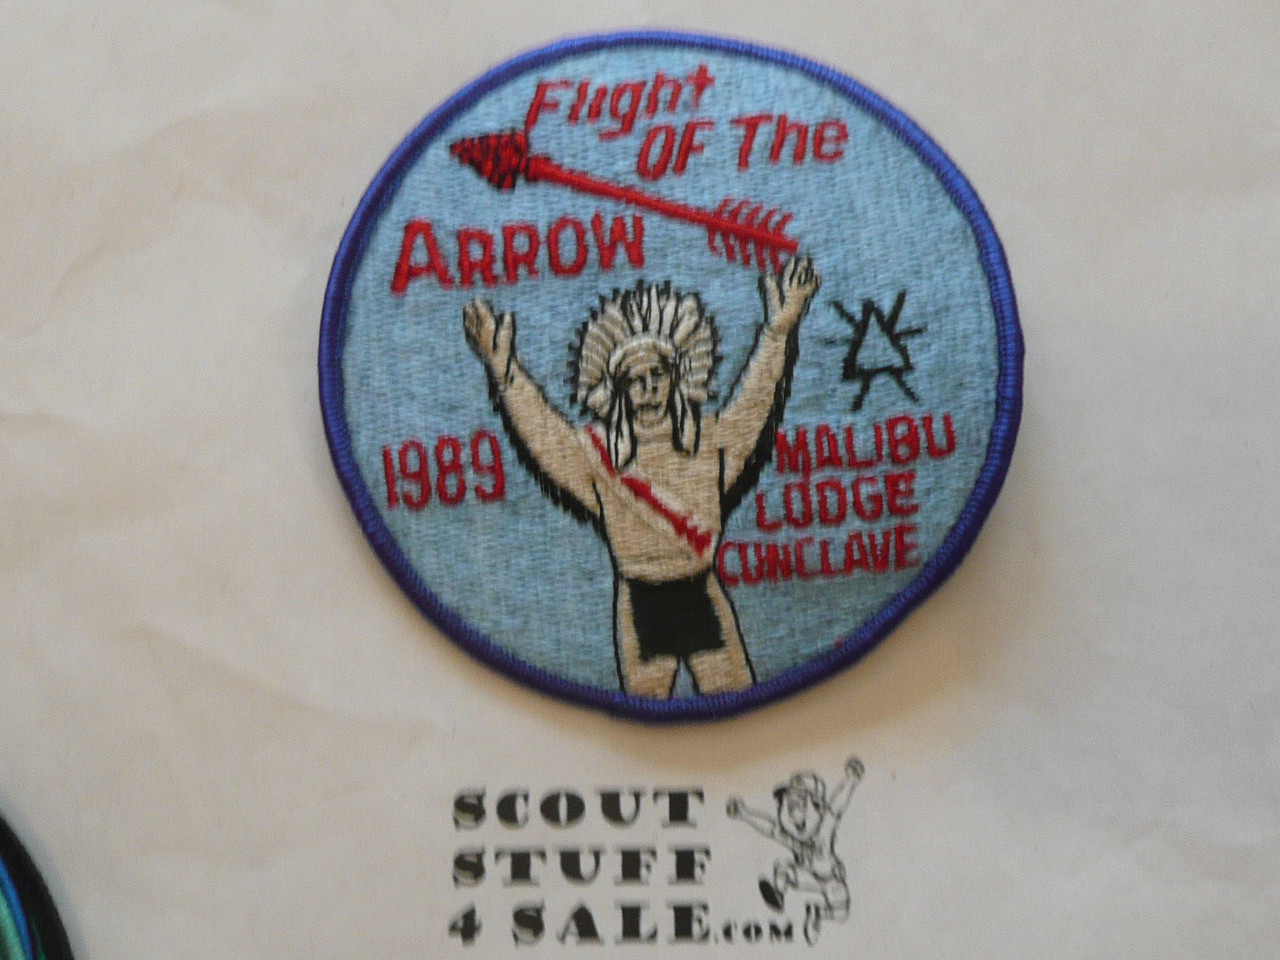 Order of the Arrow Lodge #566 Malibu 1989 Conclave STAFF Patch - Scout